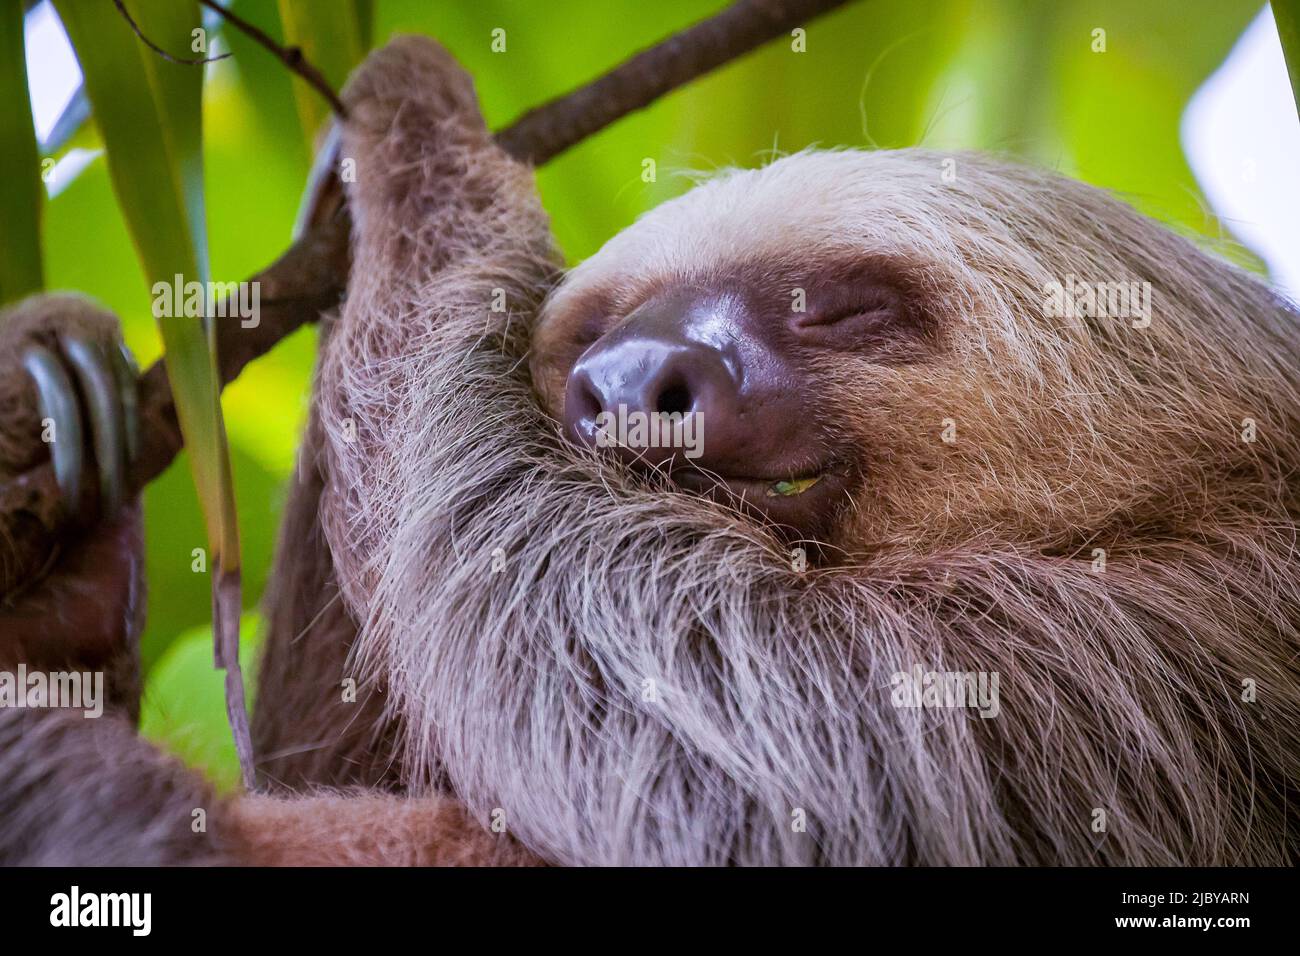 A two-toed sloth sleeps among the leafs Stock Photo